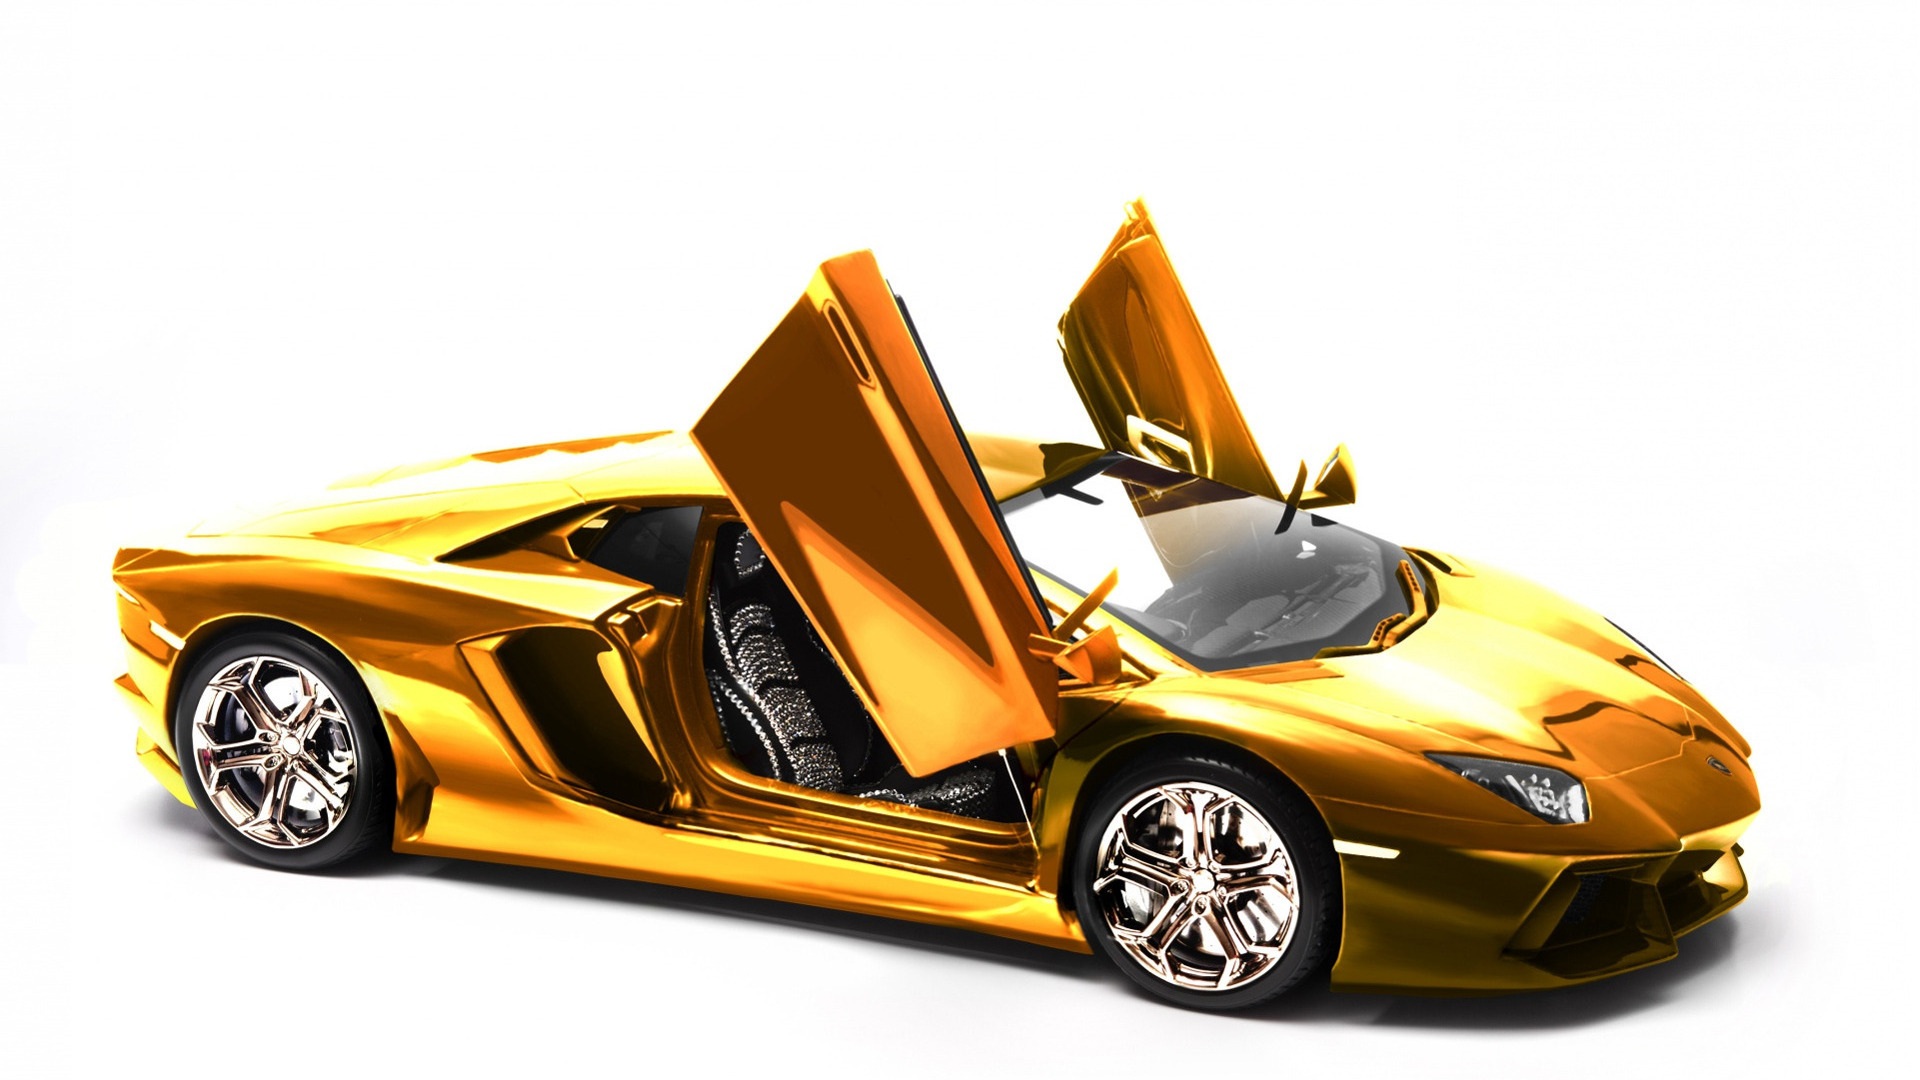 Cool Car Hd Wallpapers Free Download › Unique 4k Ultra - Gold Cool Car  Backgrounds - 1920x1080 Wallpaper 